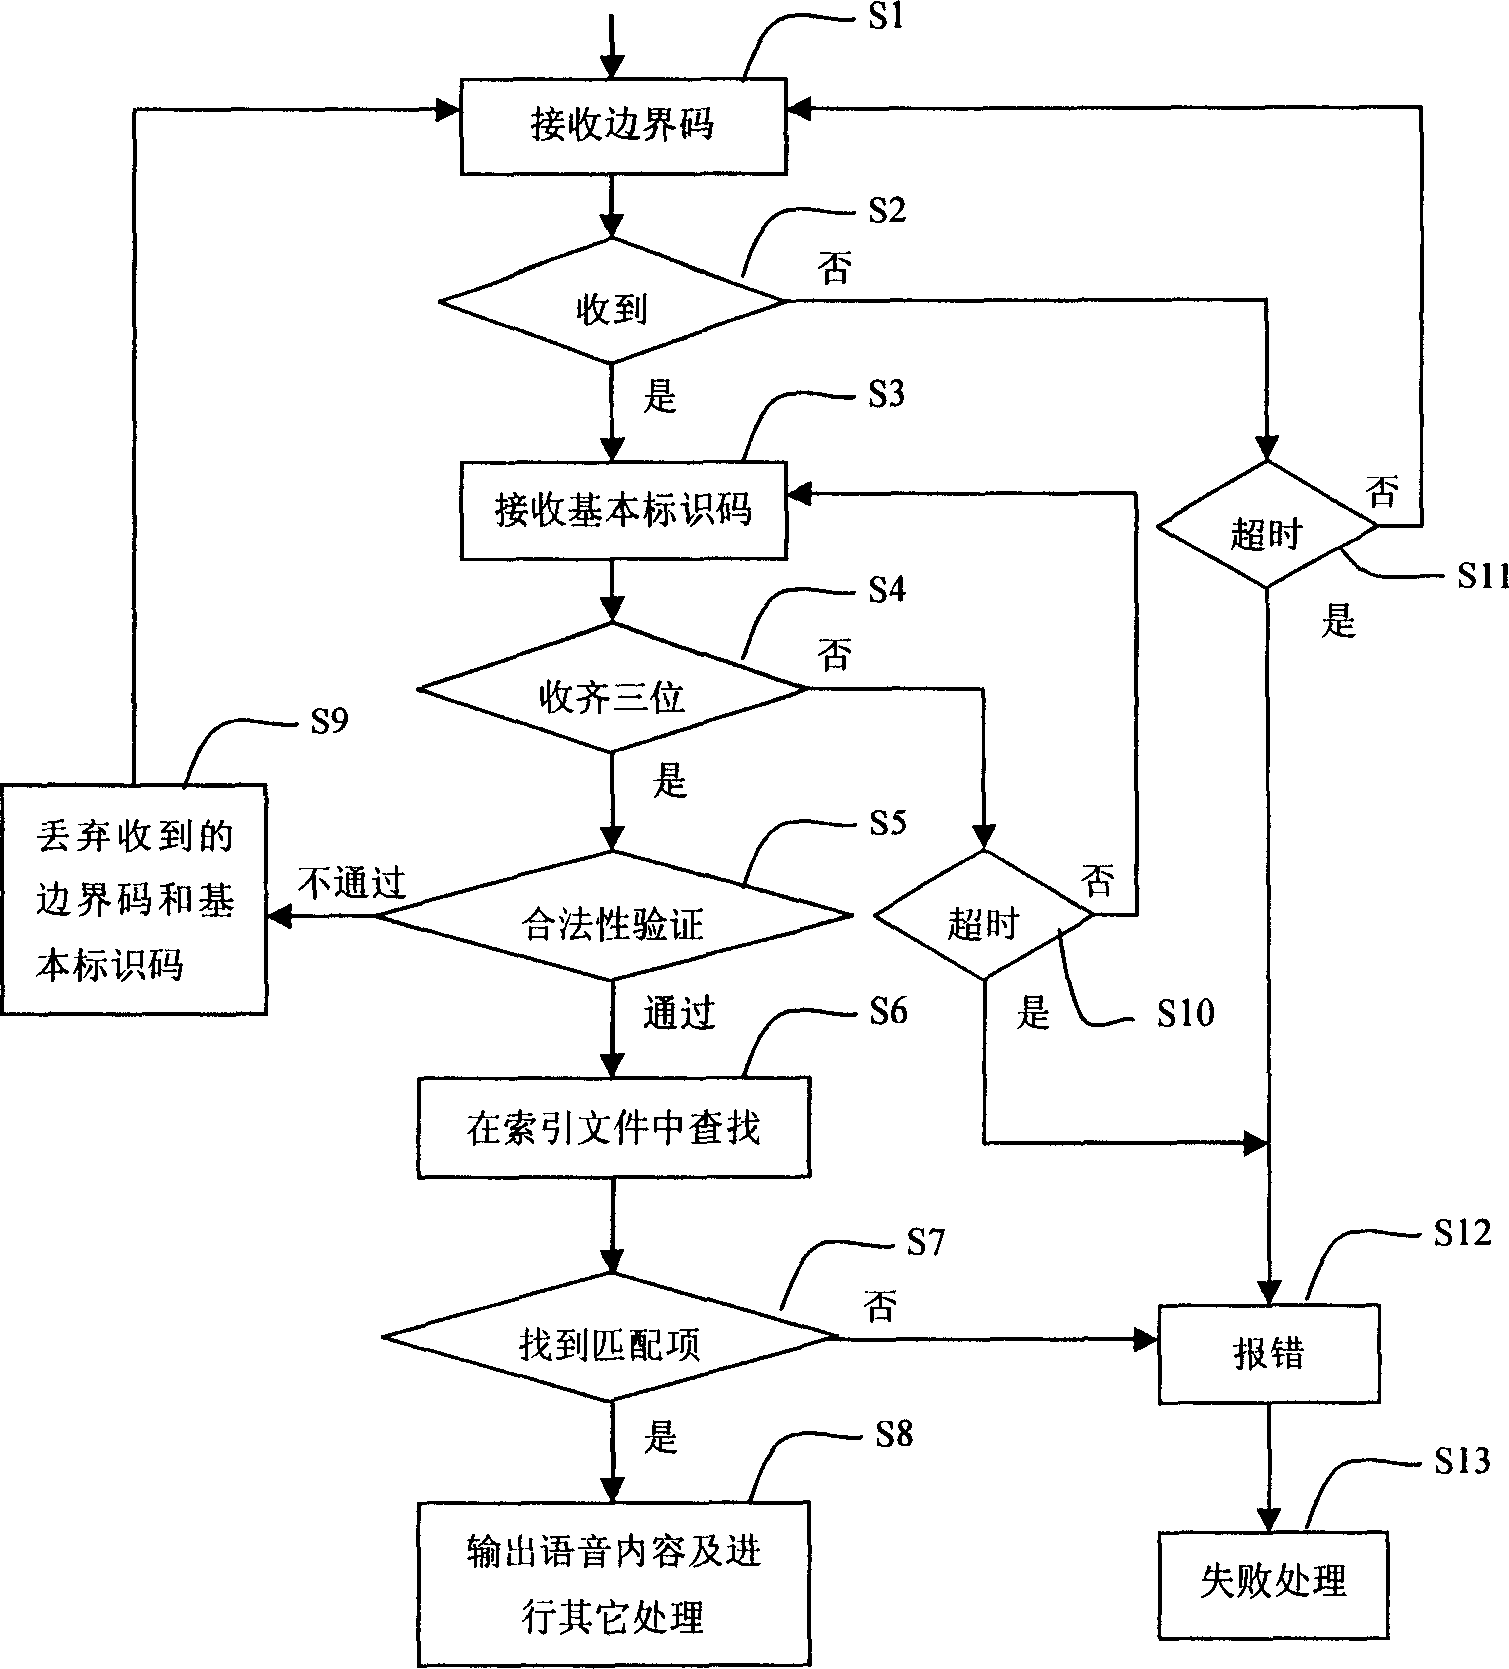 Method for automatic recognizing voice for limited range